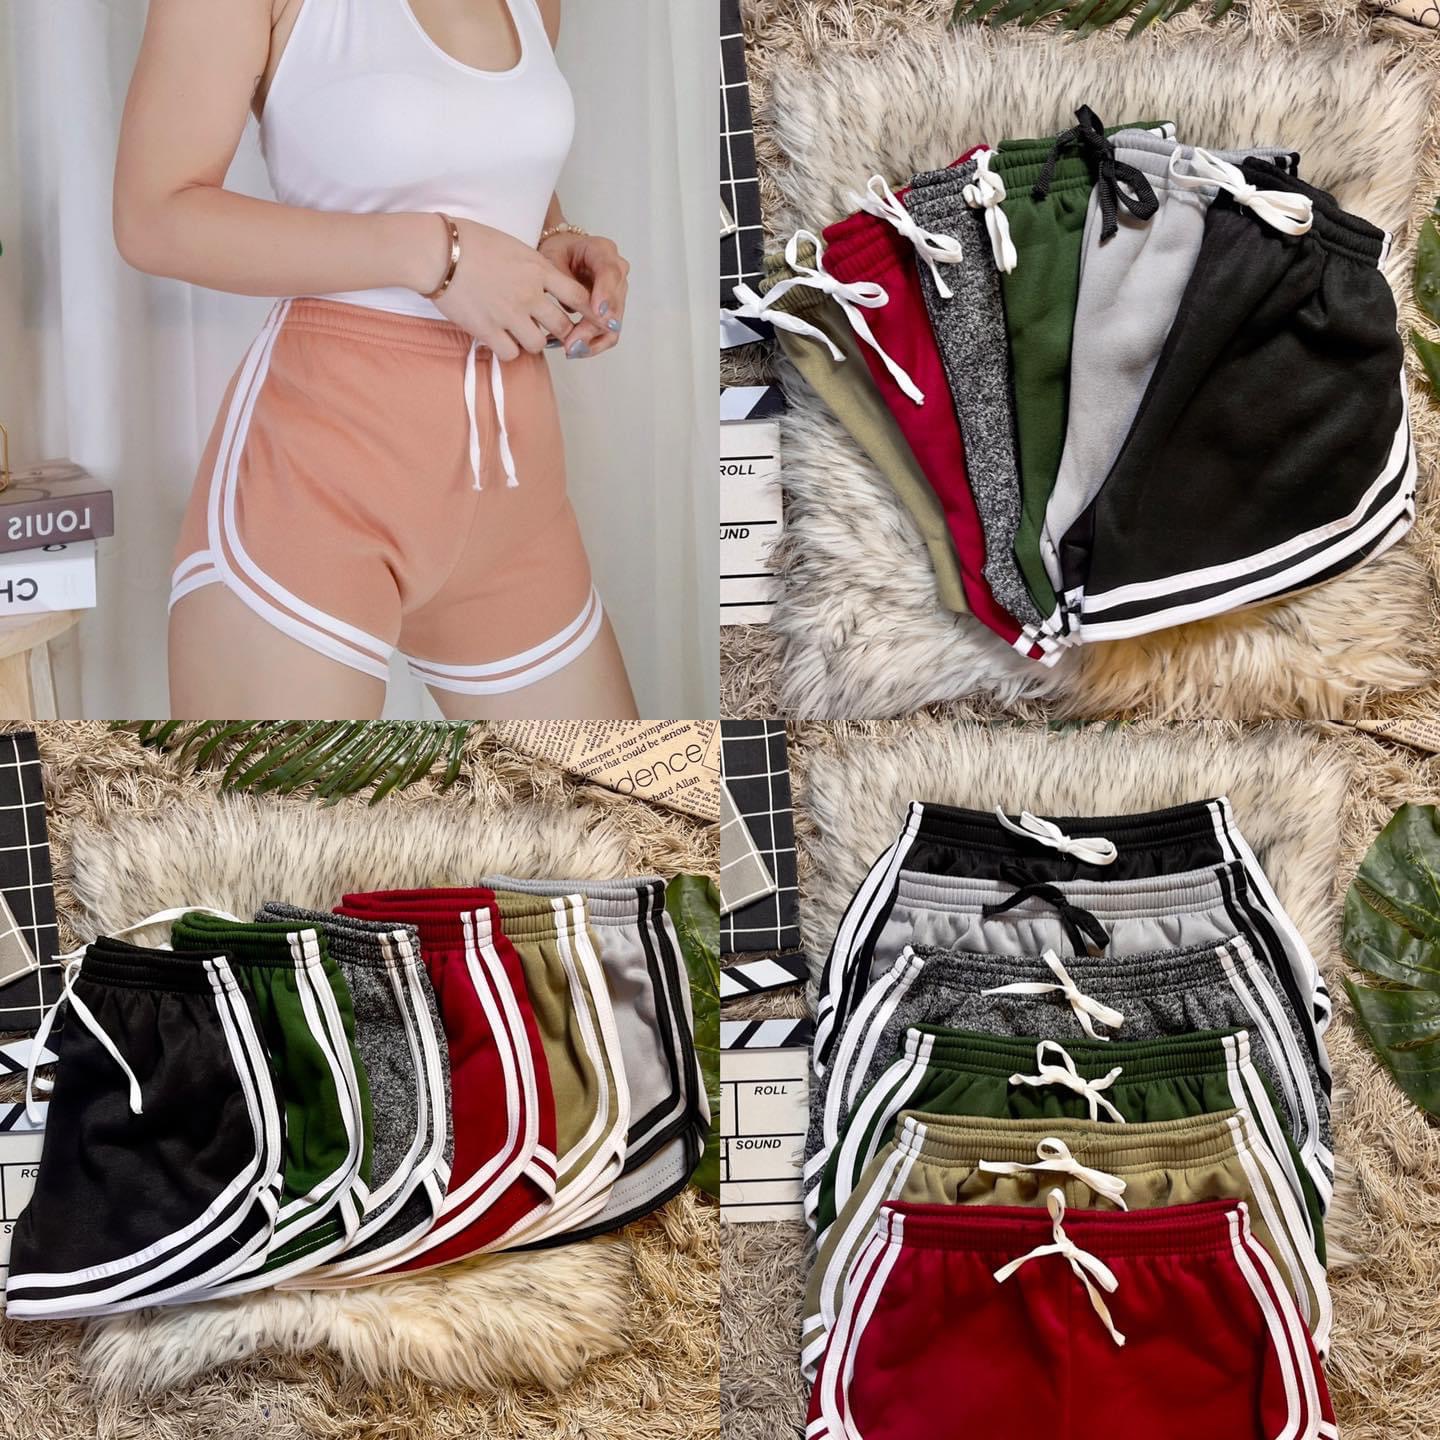 5 PCS. Booty Shorts for ADULT